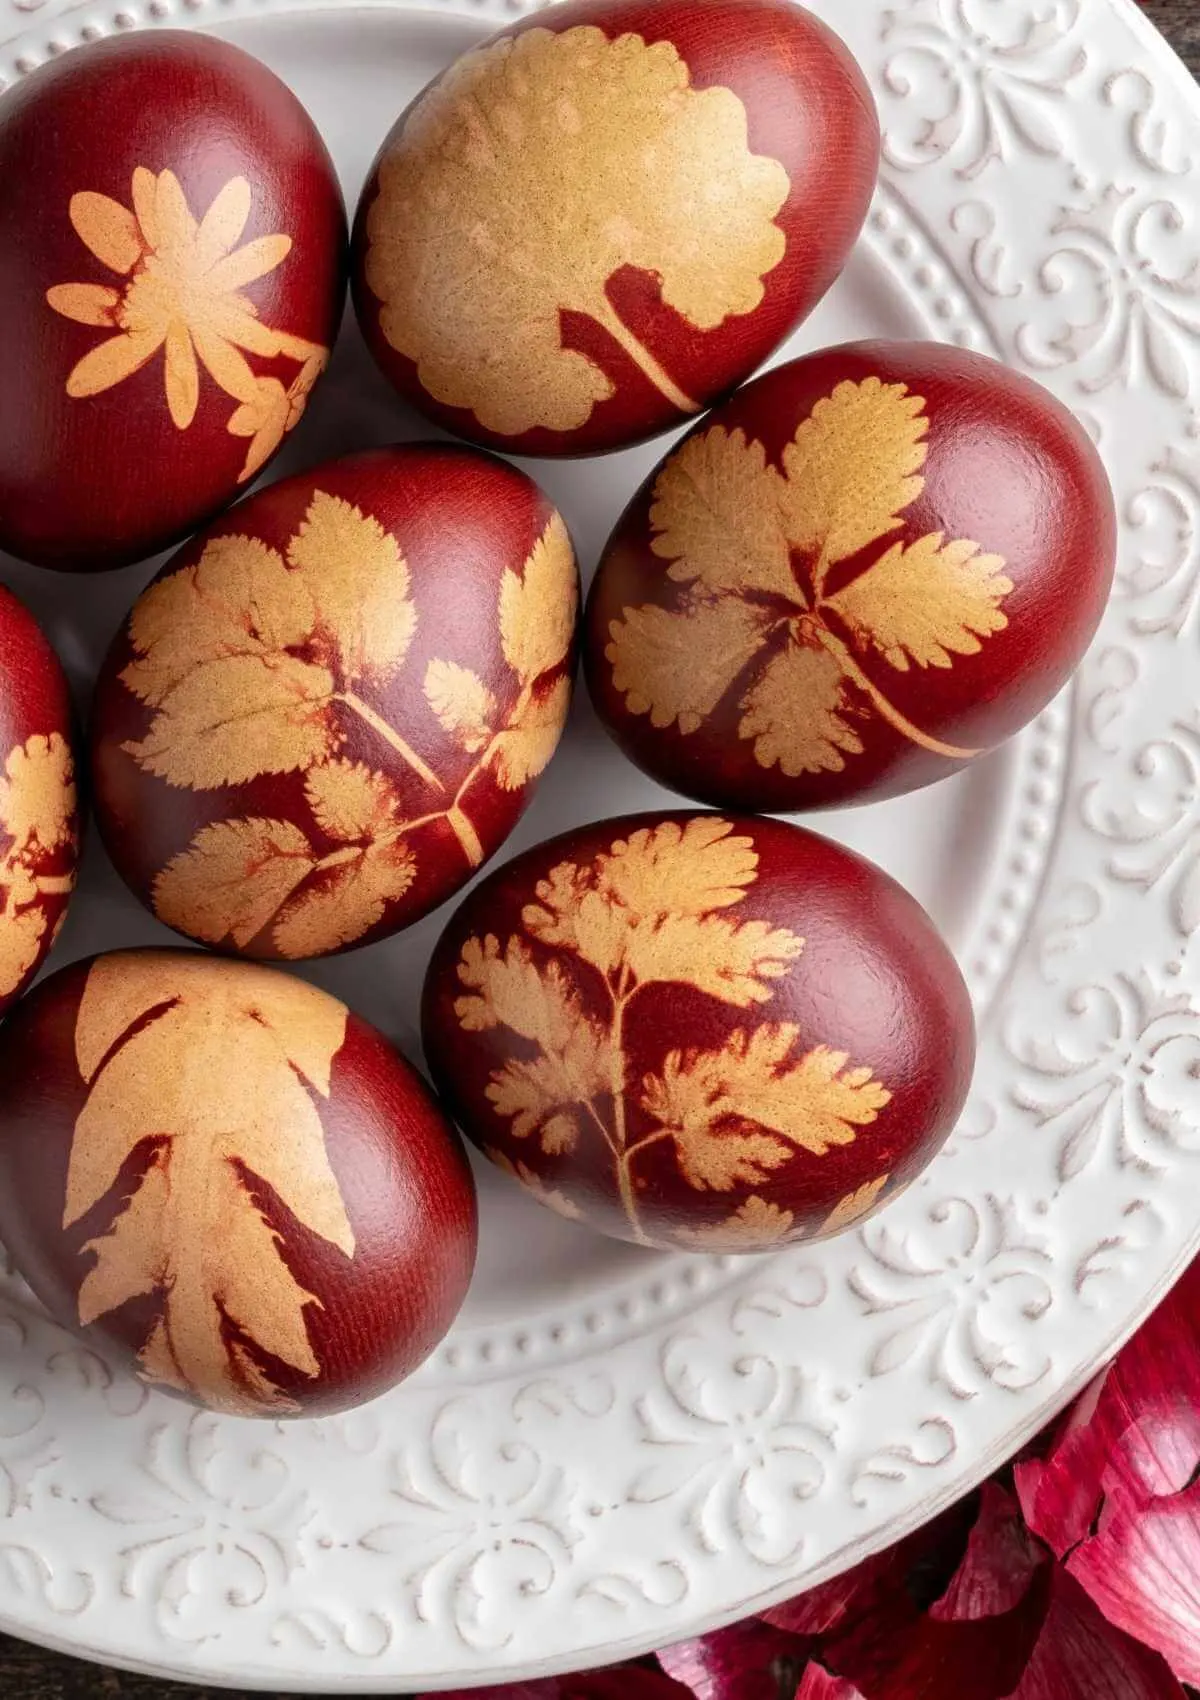 Easter eggs dyed with onion skins and flowers